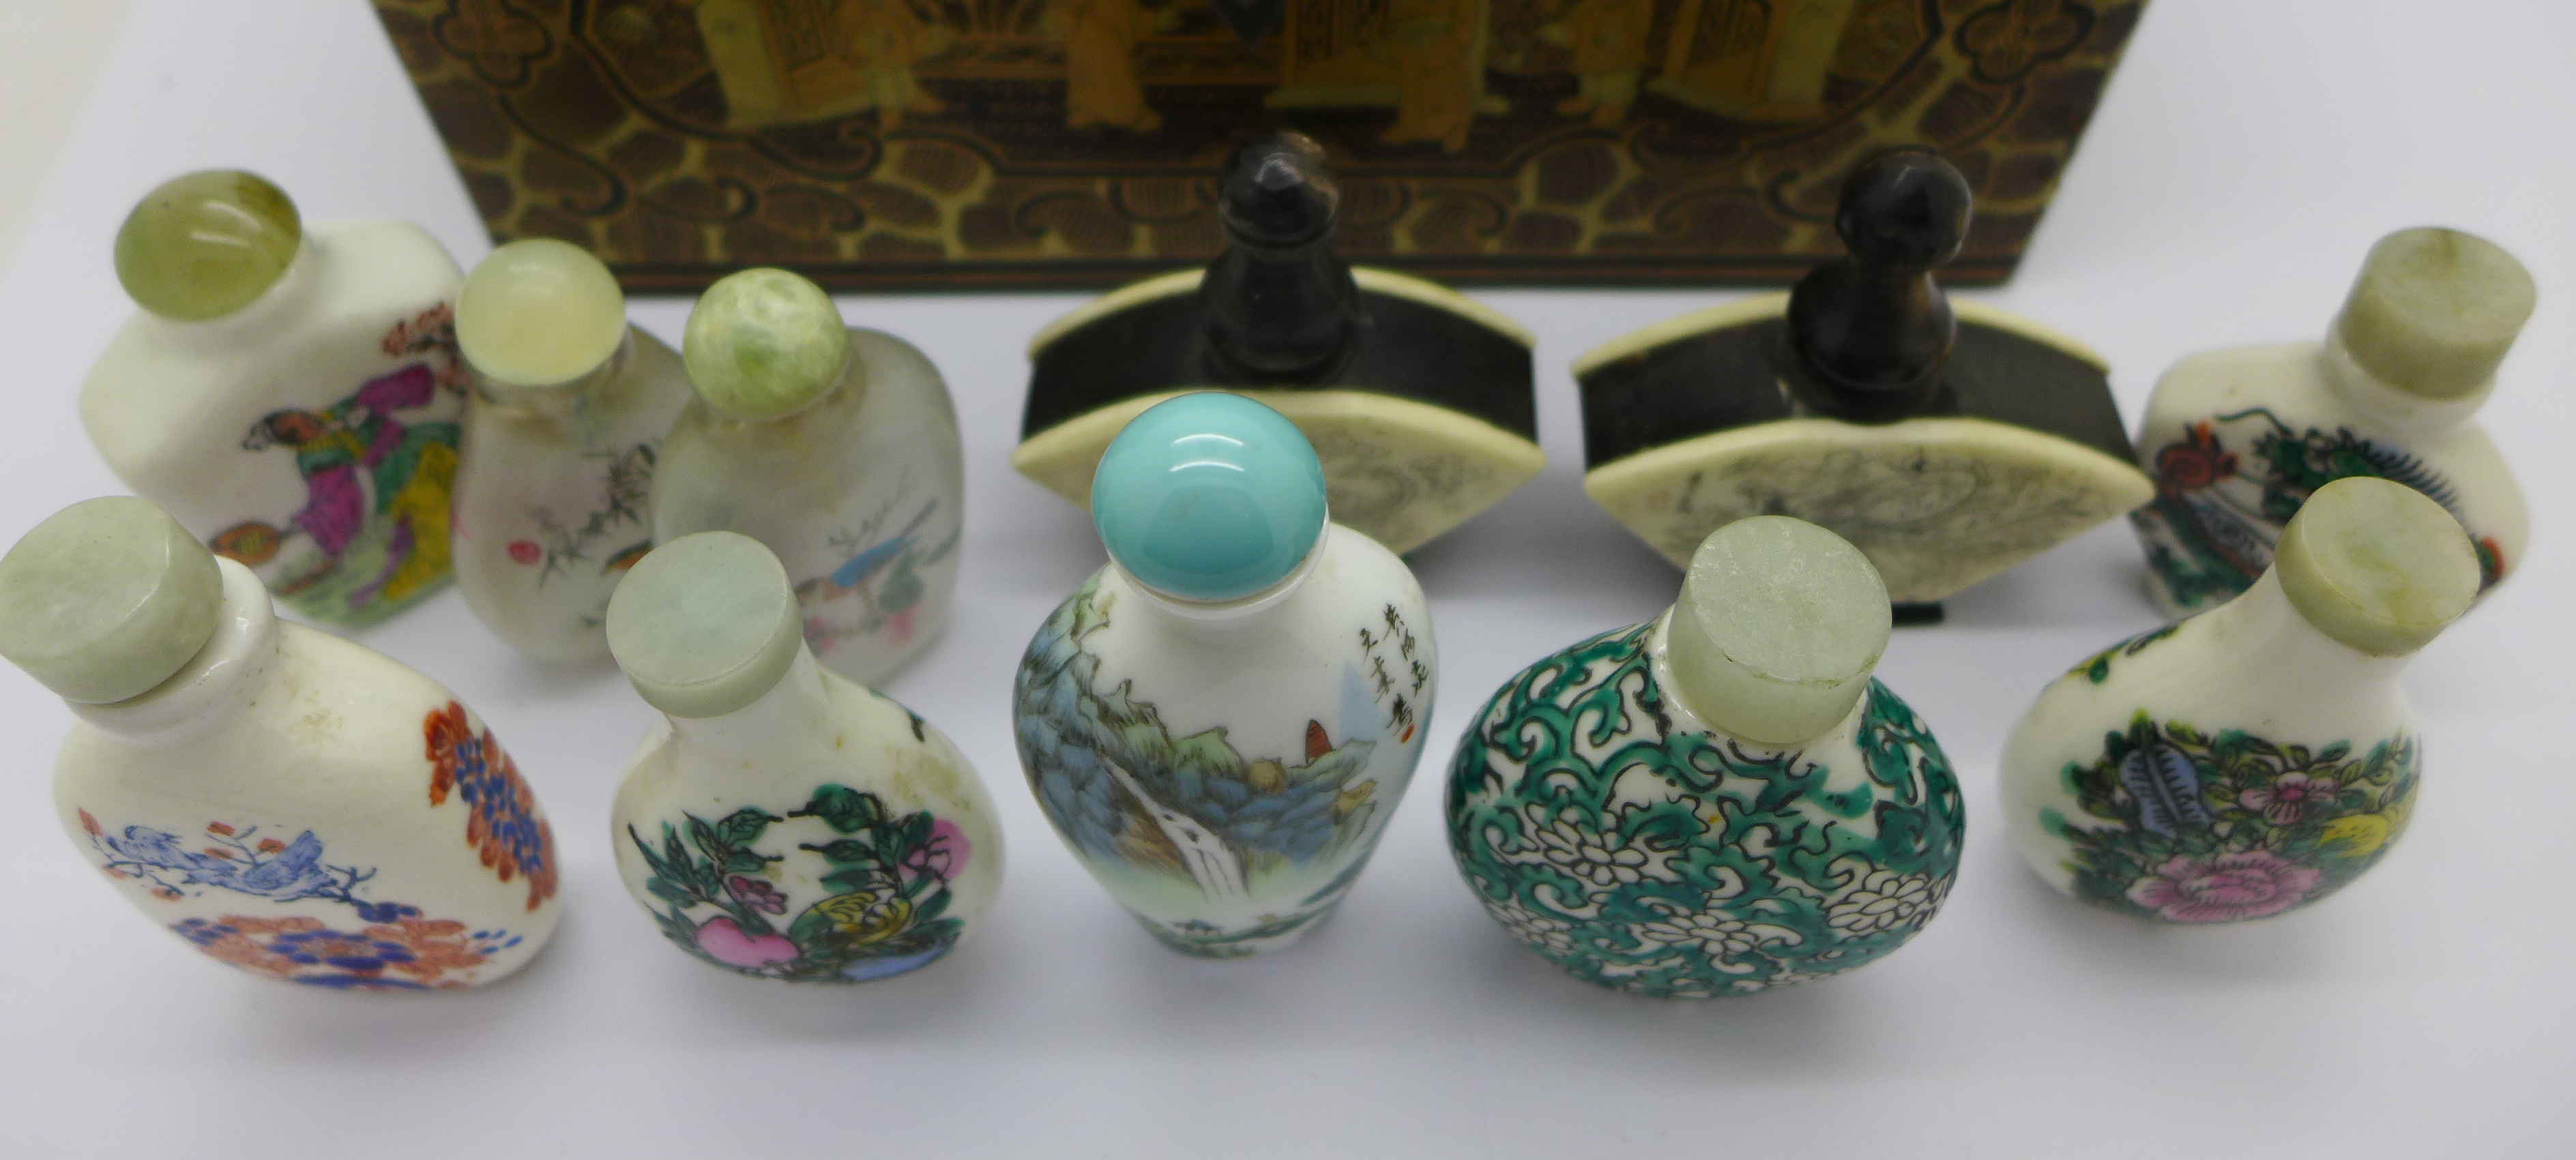 Twelve Chinese snuff boxes within a lacquered box, - Image 3 of 3